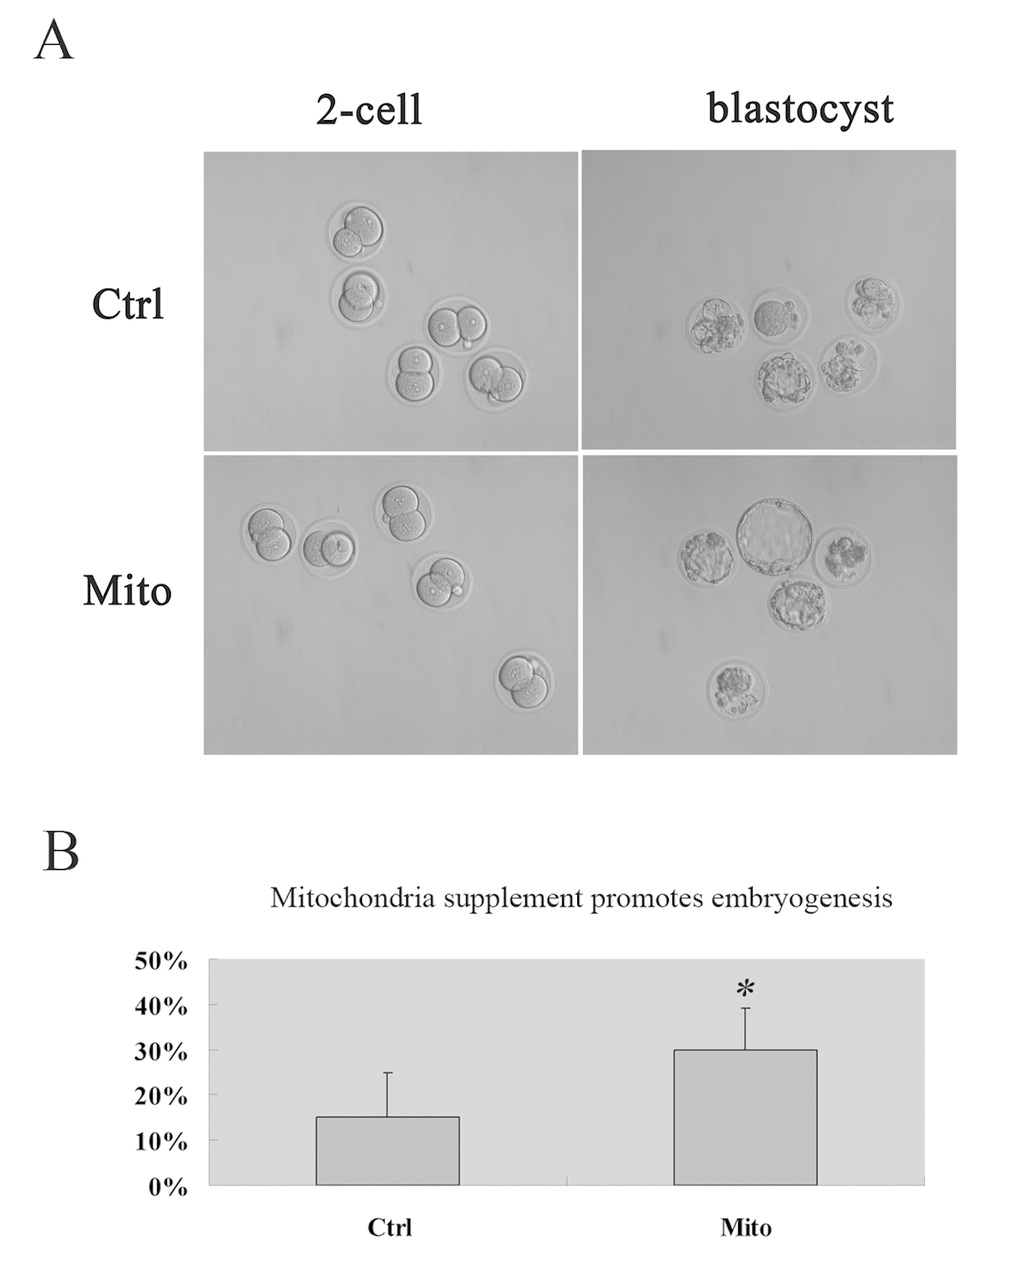 Promoted embyogenesis in aged mice through supplement of autologous ADSC mitochondria in MII oocytes. MII oocytes were collected from each mouse for ICSI and microinjection with mitochondria extracted from its autologous ADSCs in HTF (Mito, n=20), and for control group, the GV oocytes were collected for ICSI and microinjected with HTF (Ctrl, n=20). Then the embryos were cultured in vitro, and the embryo development was recorded (A, 20X) and developmental rates was calculated (B), showing the improved embryogenesis after autologous ADSC mitochondria supplement in aged mice.